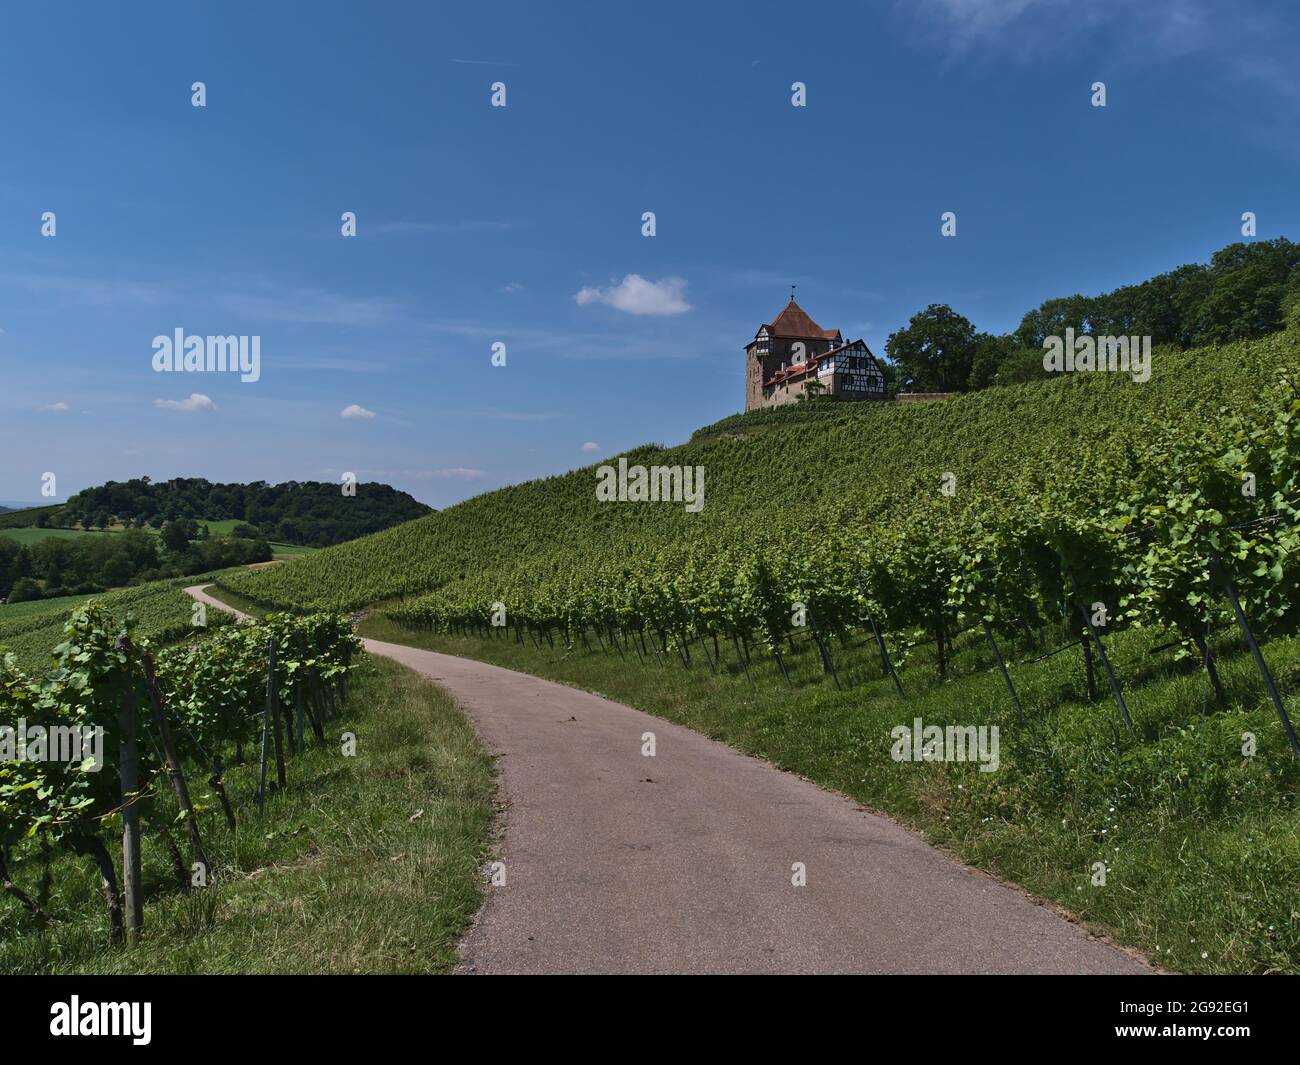 Diminishing perspective of agricultural road leading through vineyards with green leaves below historic medieval castle Burg Wildeck in Germany. Stock Photo